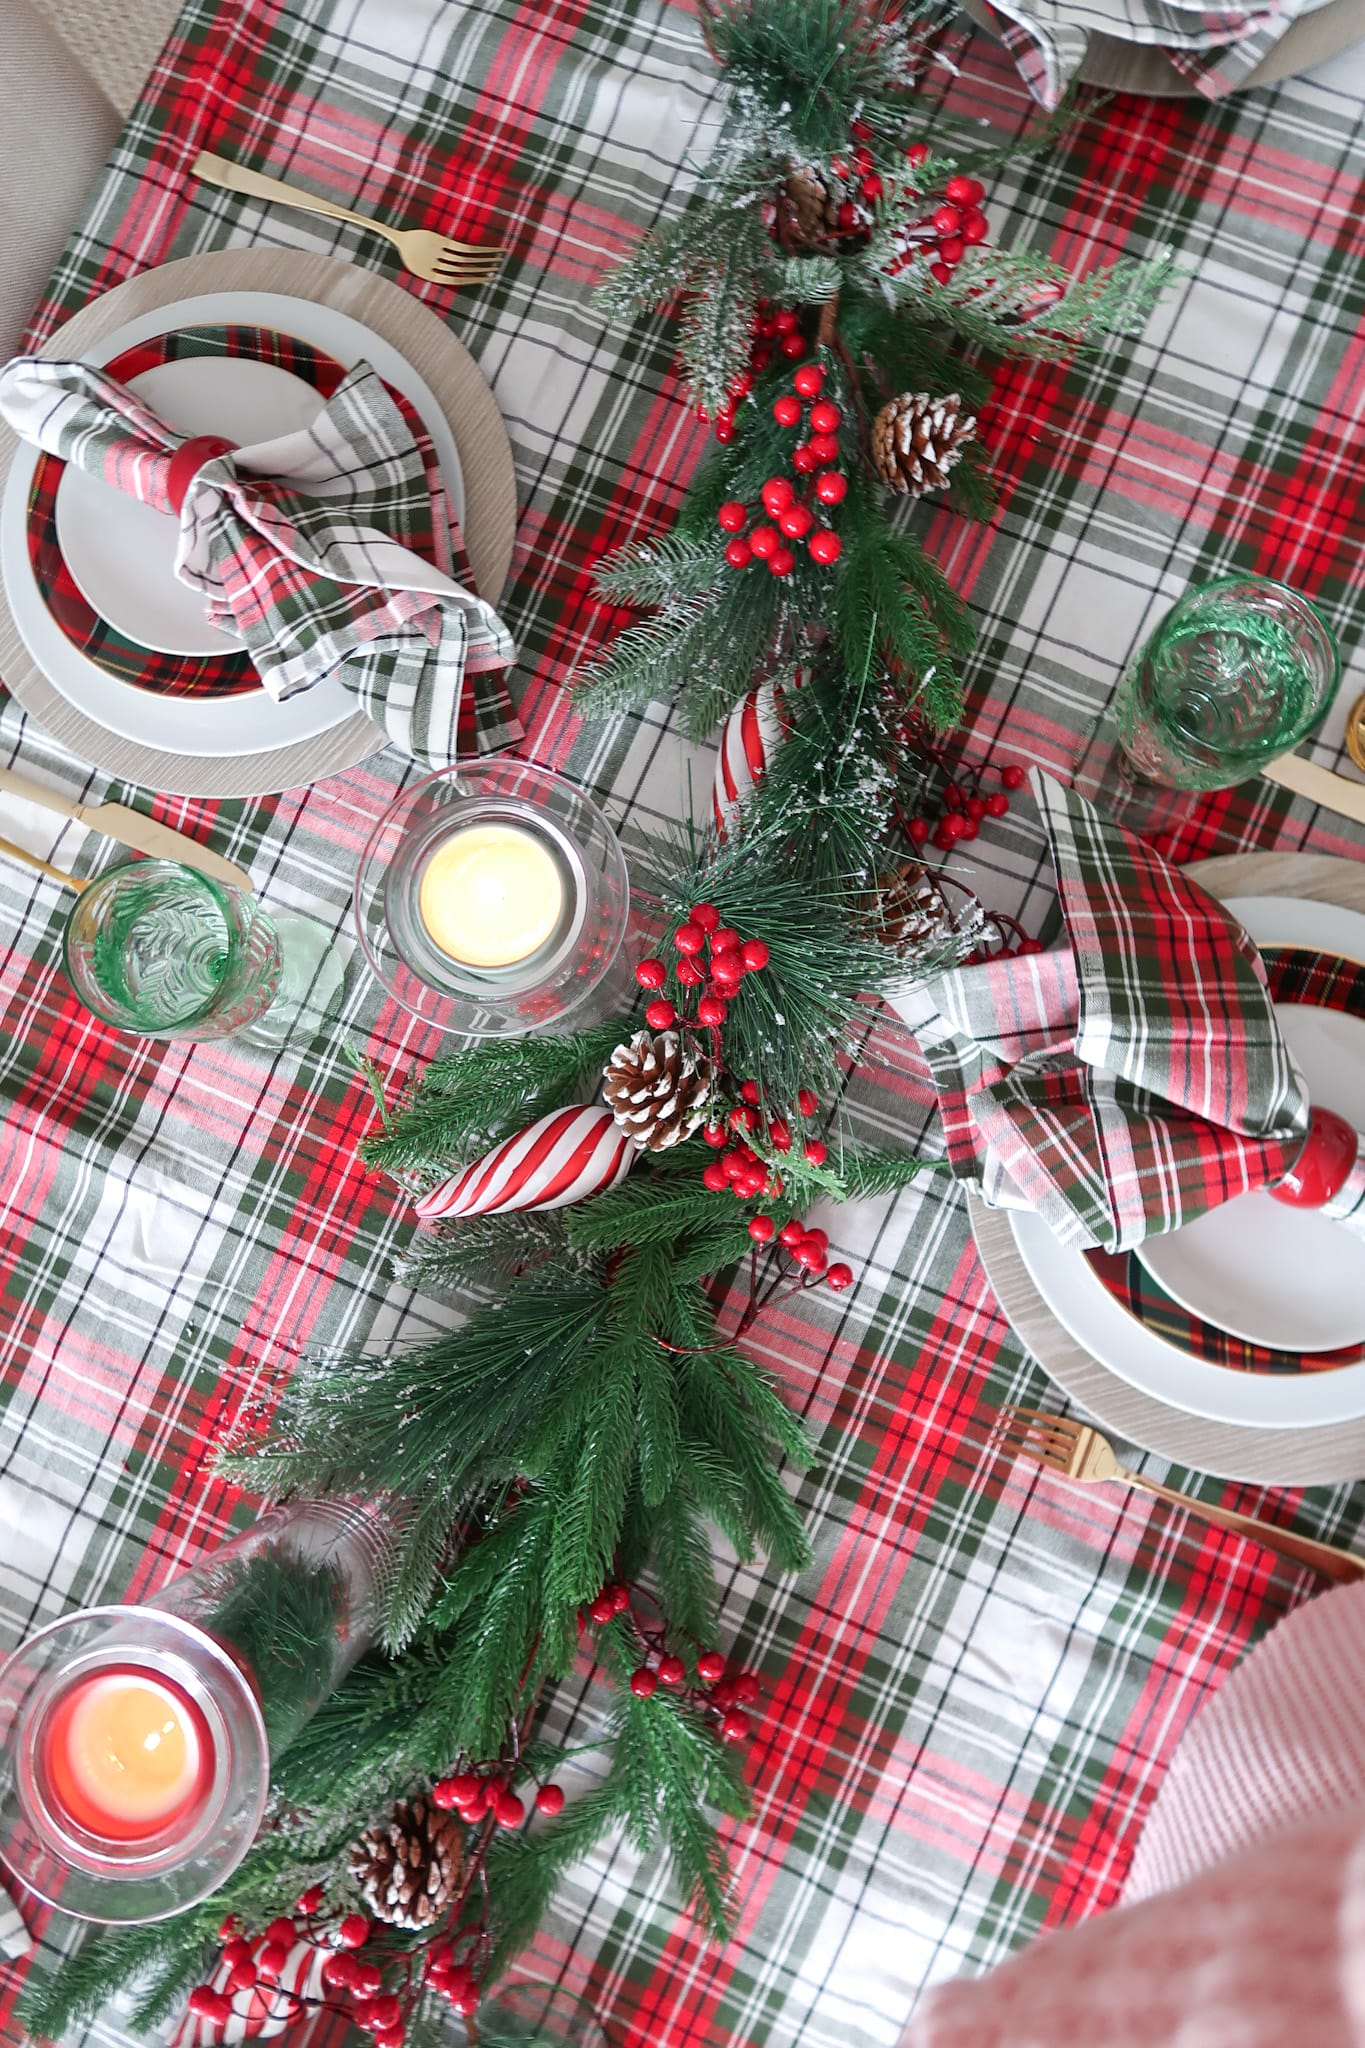 Our Christmas Dining Room • Honey We're Home